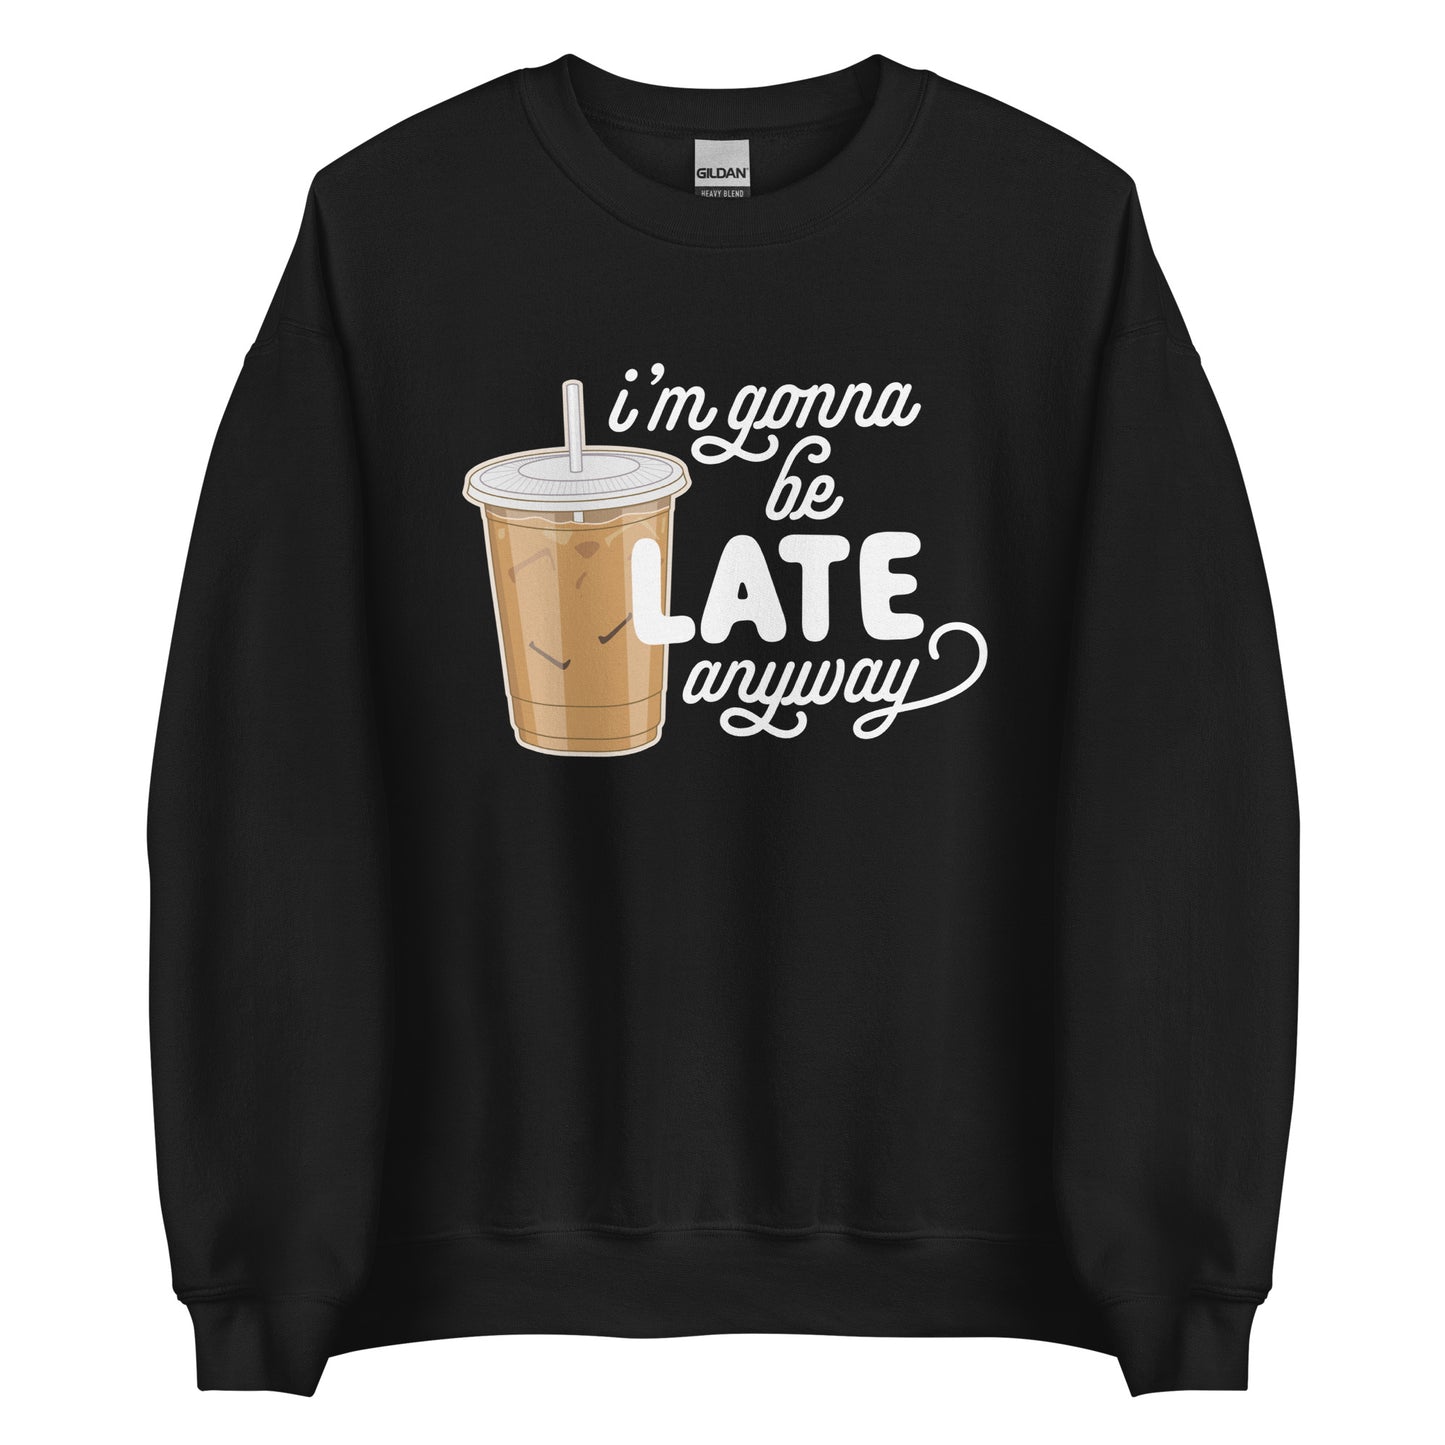 A black crewneck sweatshirt featuring an illustration of iced coffee. Text next to the coffee reads "I'm gonna be LATE anyway".